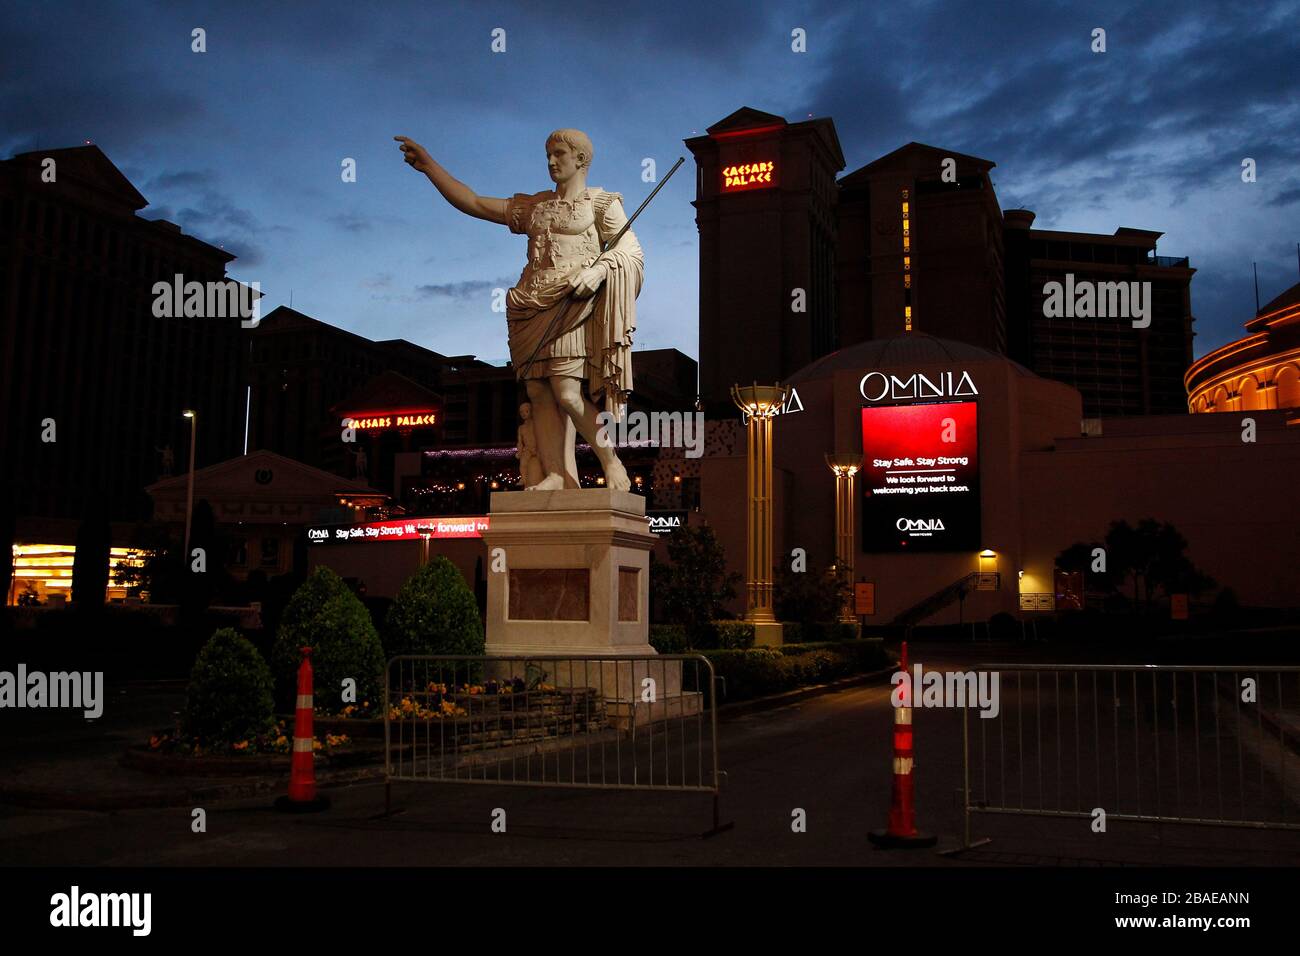 A general view of the Colosseum entrance at Caesars Palace on February 3,  2016 in Las Vegas, Nevada, USA. Photo by Denise Truscello/Caesars Palace  via ABACAPRESS.COM Stock Photo - Alamy